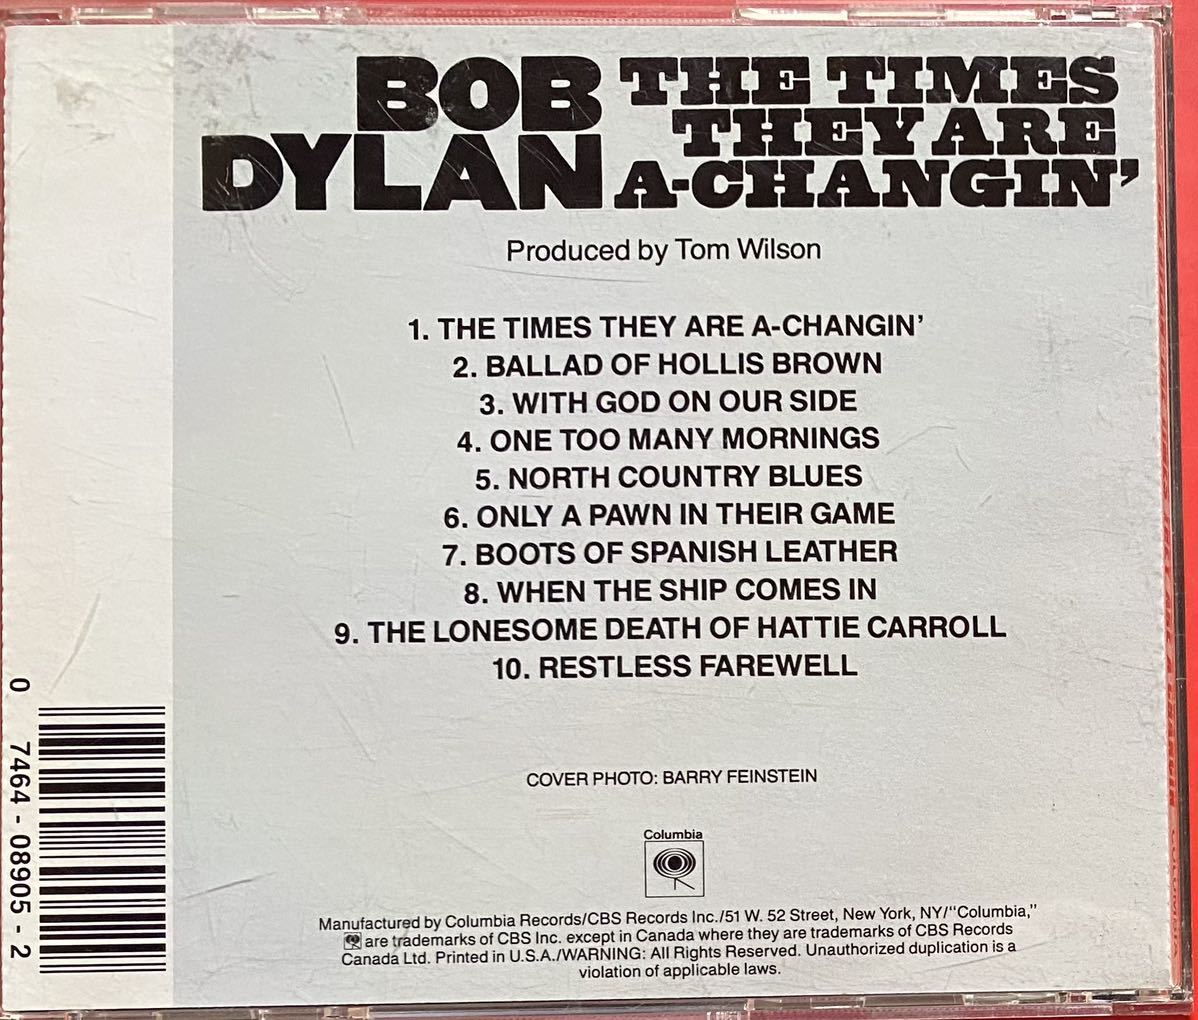 【CD】BOB DYLAN「時代は変わる / THE TIMES THEY ARE A-CHANGIN’」ボブ・ディラン 輸入盤　[0805]_画像2